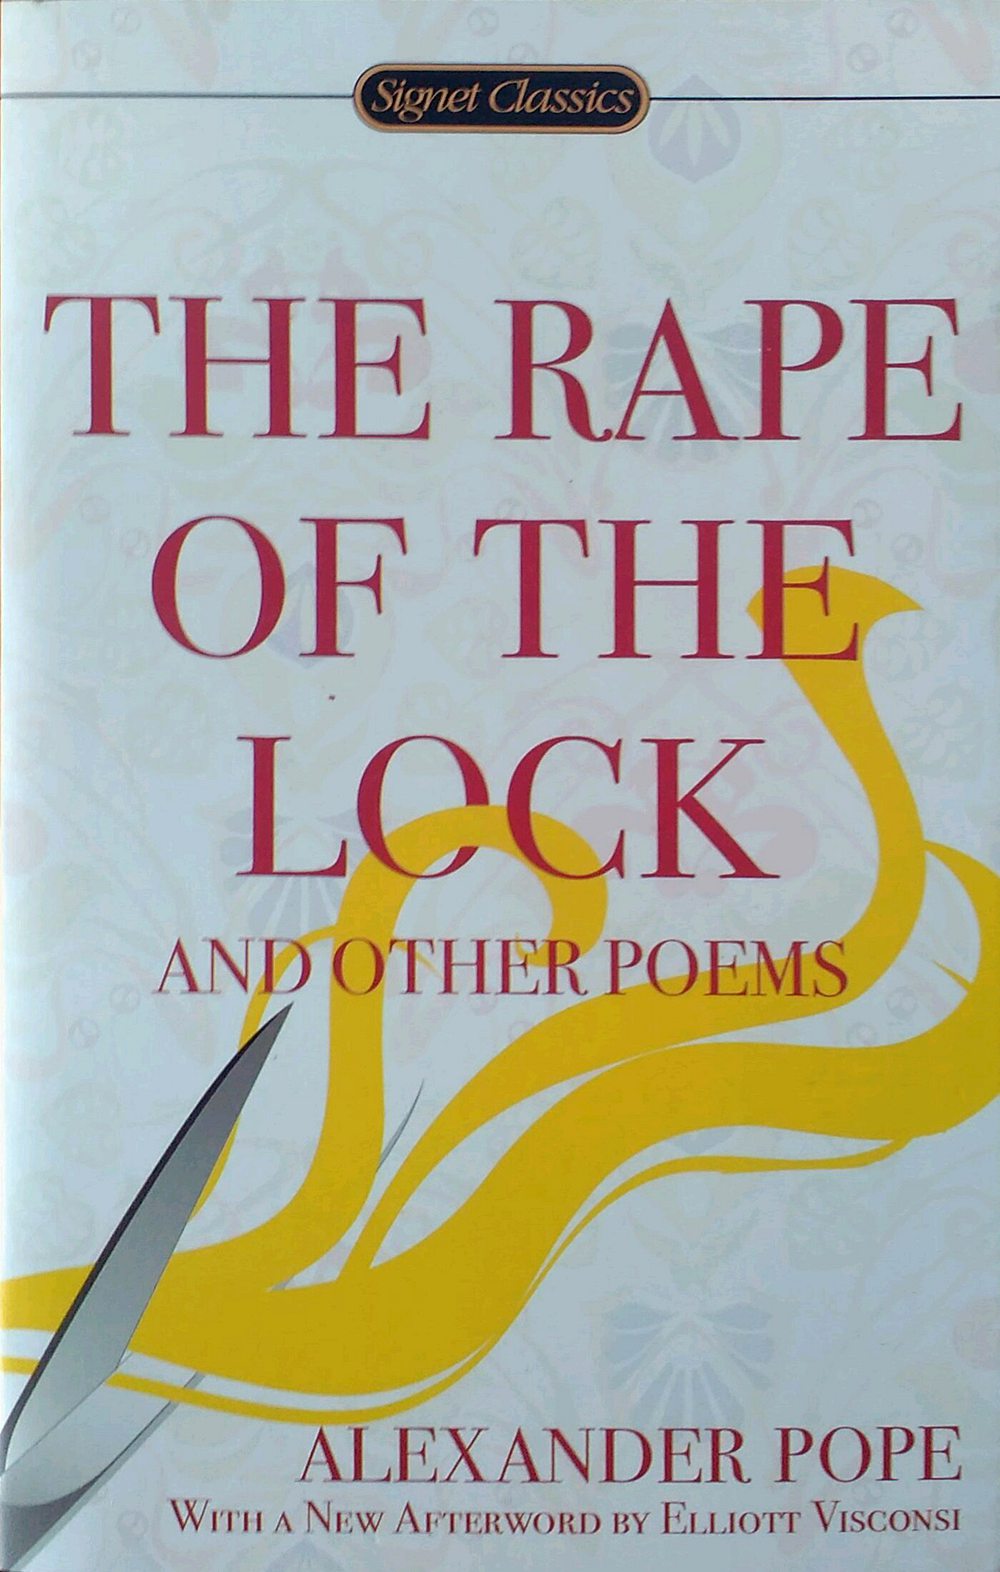 T现货 英文原版 he Rape of the Lock and Other Poems 史诗夺发记和其他诗歌